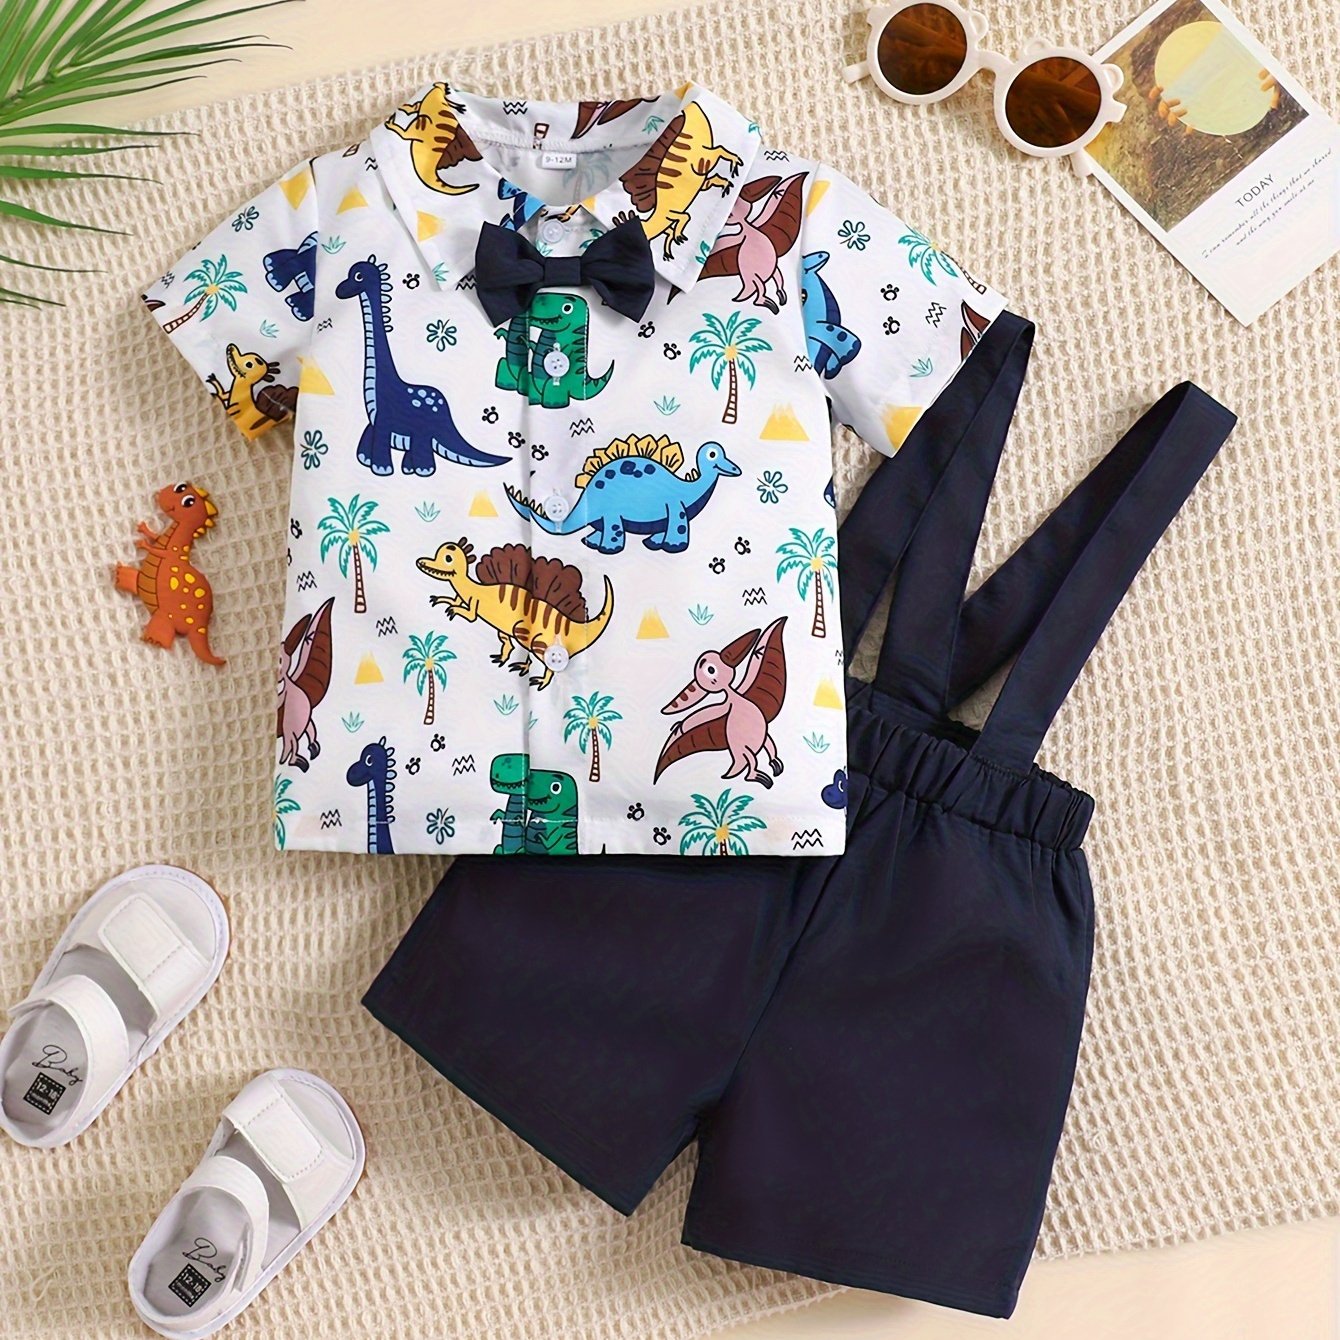 

2pcs Baby Boys' Summer Outfit, Dinosaur Print Short Sleeve Shirt With Bowtie & Suspenders Shorts Set, Gentleman Style, Casual For Infant - Various Sizes Available